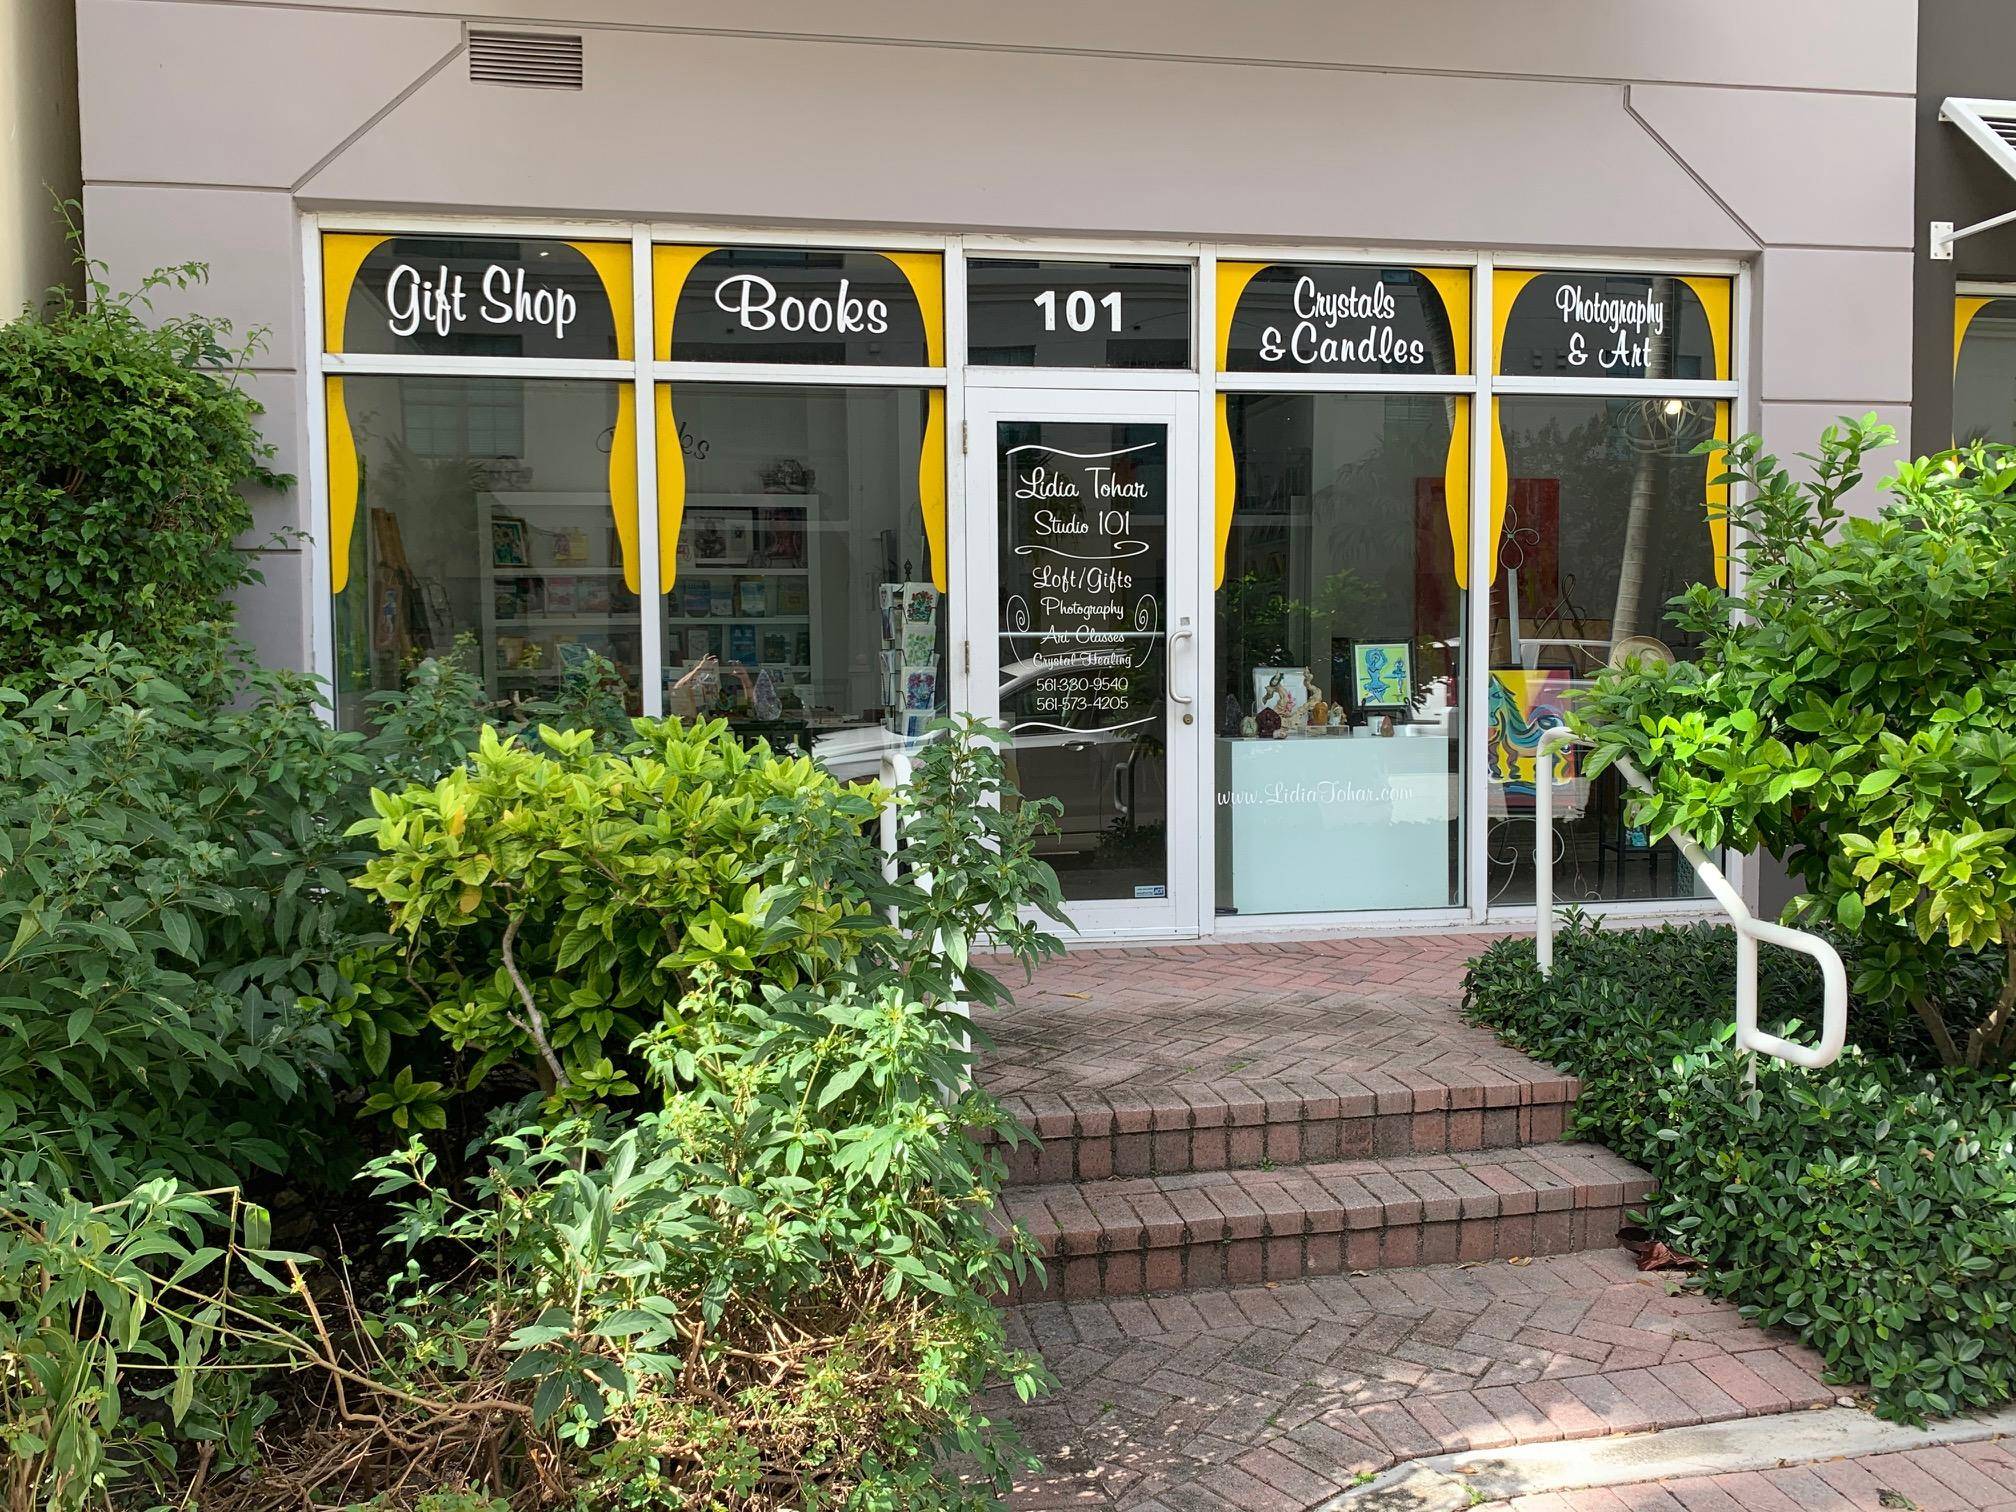 Ground floor condo retail space for sale or lease in desirable downtown Delray Beach.